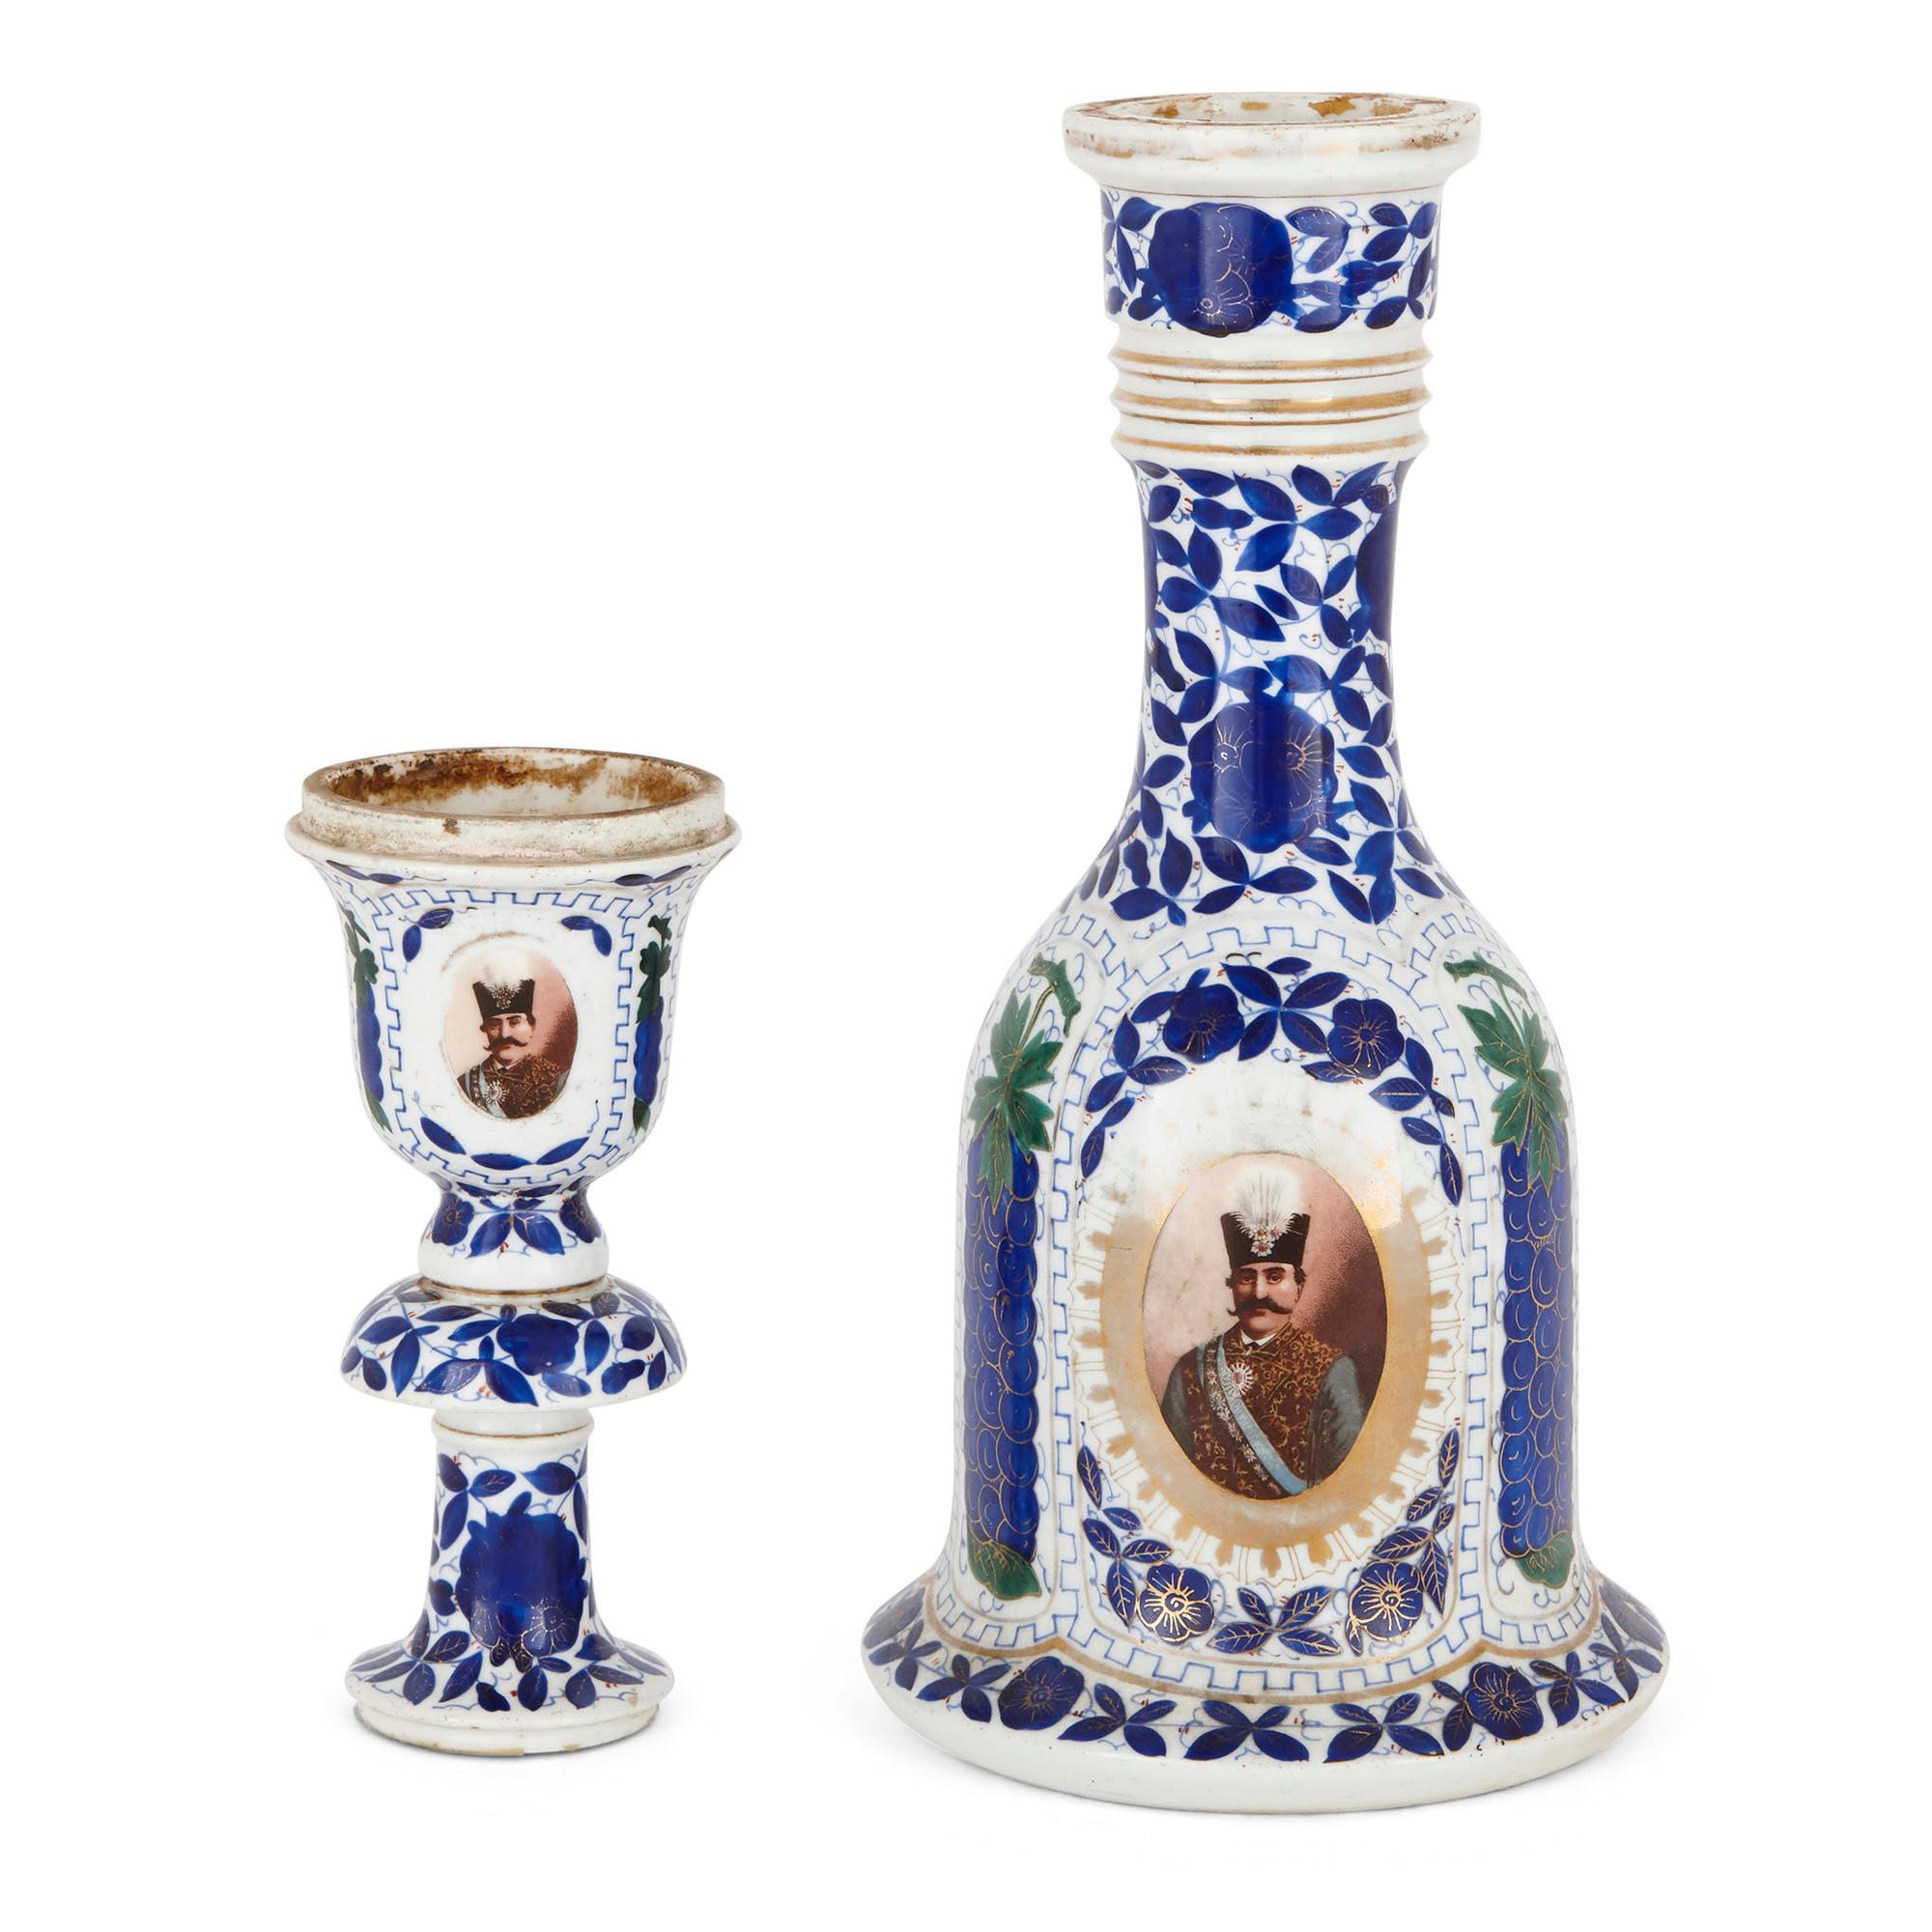 This beautiful porcelain huqqa (or hookah) is of Continental, possibly Russian origin and was created for the Persian market. The item is a historic smoking accessory which is highly collectable. 

The huqqa features a slightly flared cup-shaped